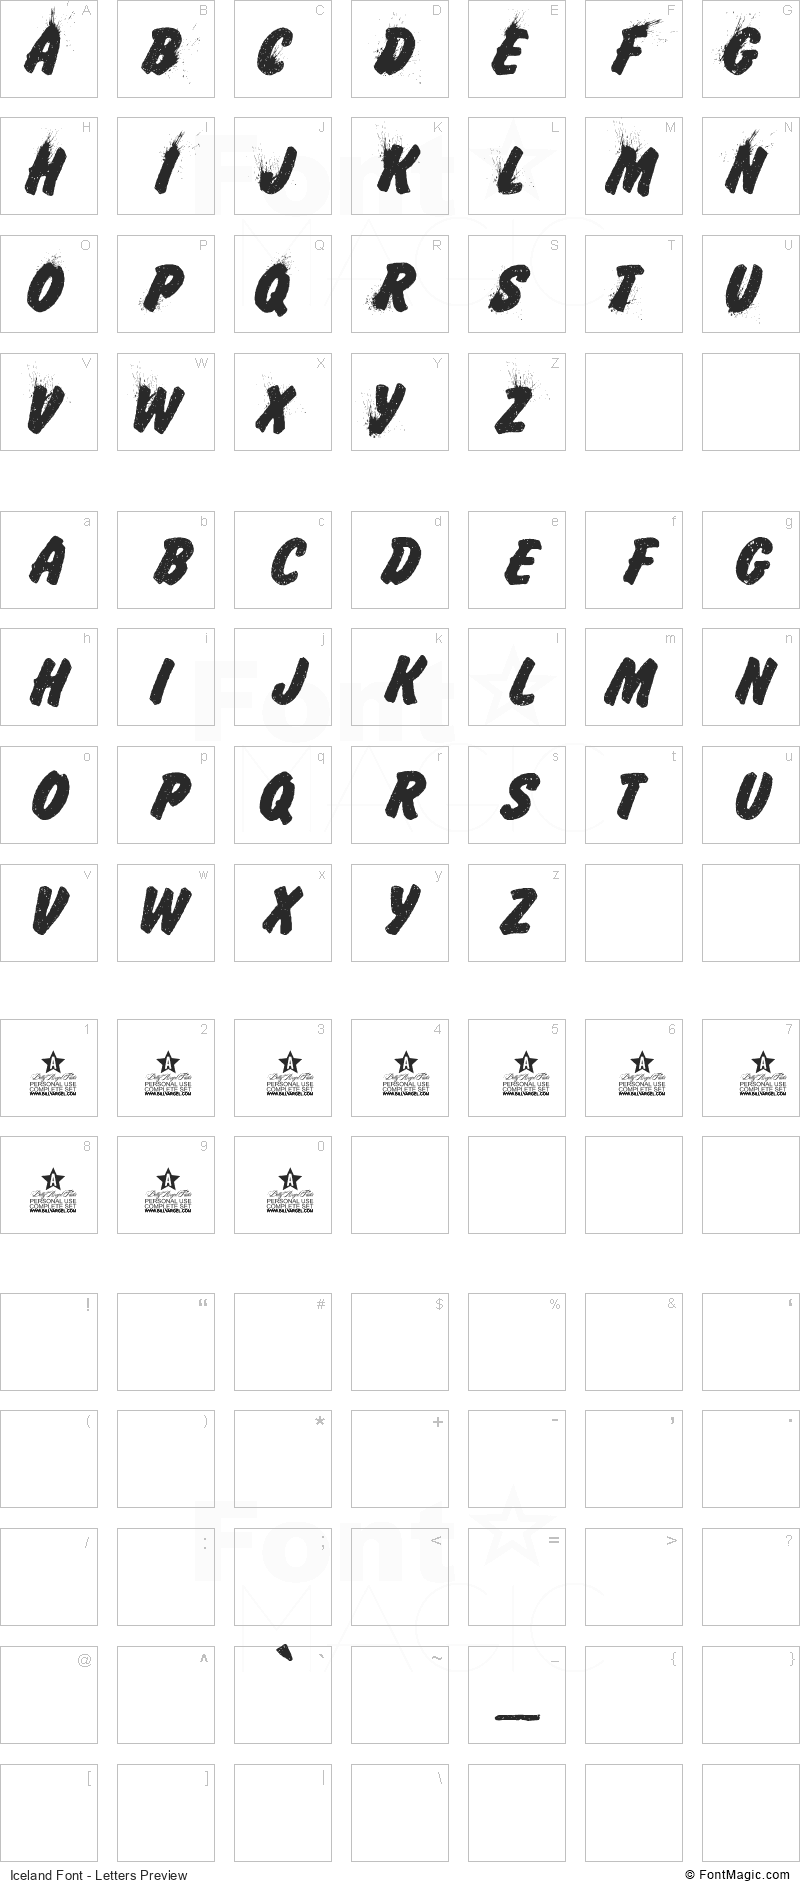 Iceland Font - All Latters Preview Chart